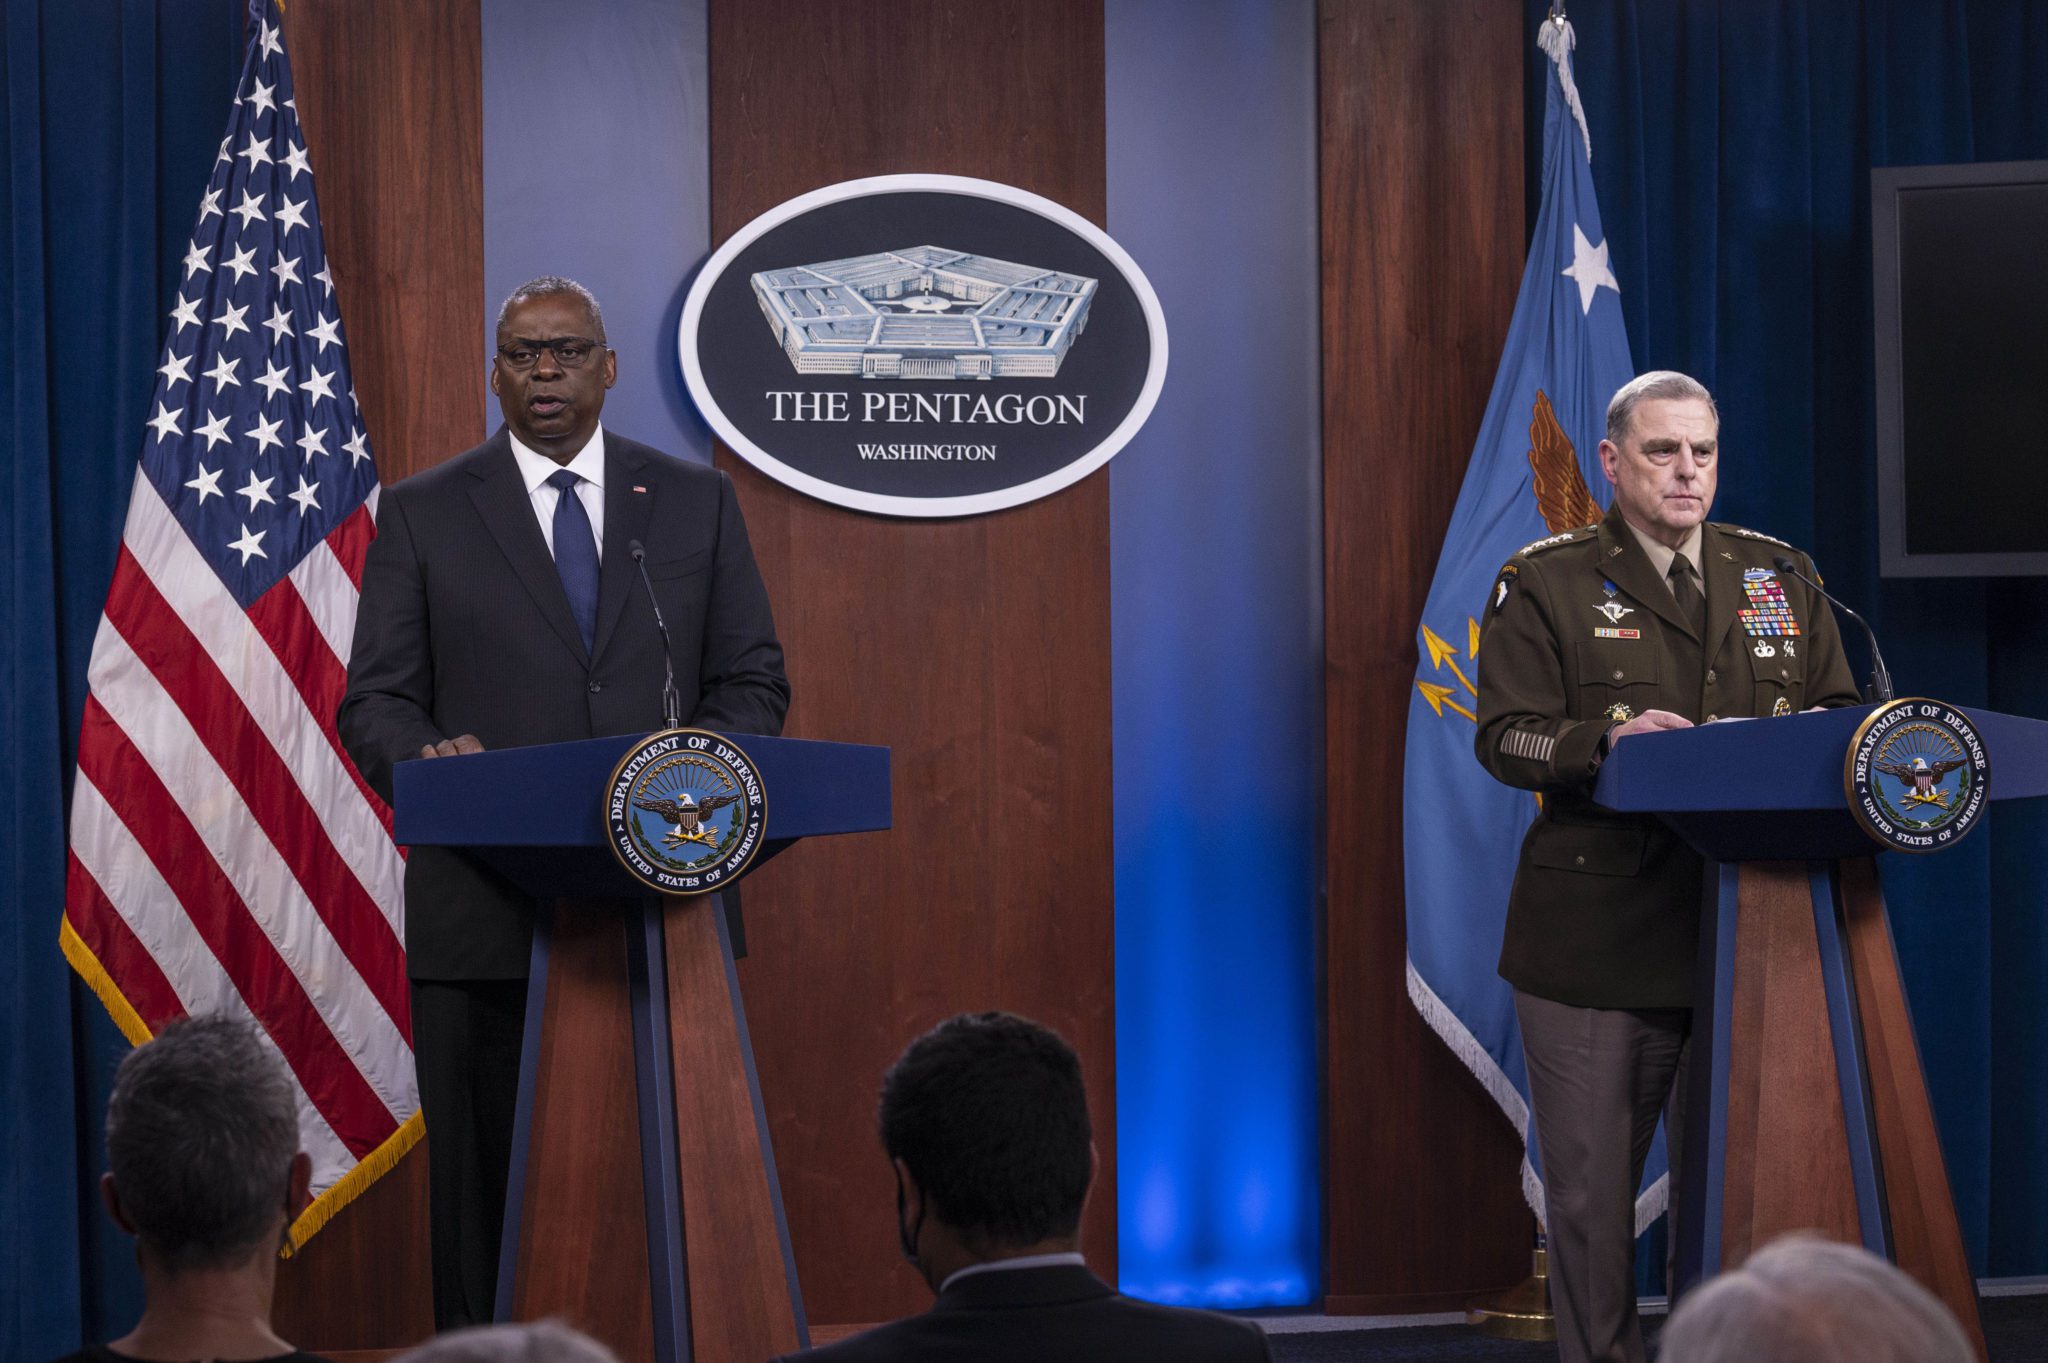 Secretary_of_Defense_Lloyd_J._Austin_III_and_Army_Gen._Mark_A._Milley,_chairman_of_the_Joint_Chiefs_of_Staff,_brief_the_media_210818-F-CN170-044